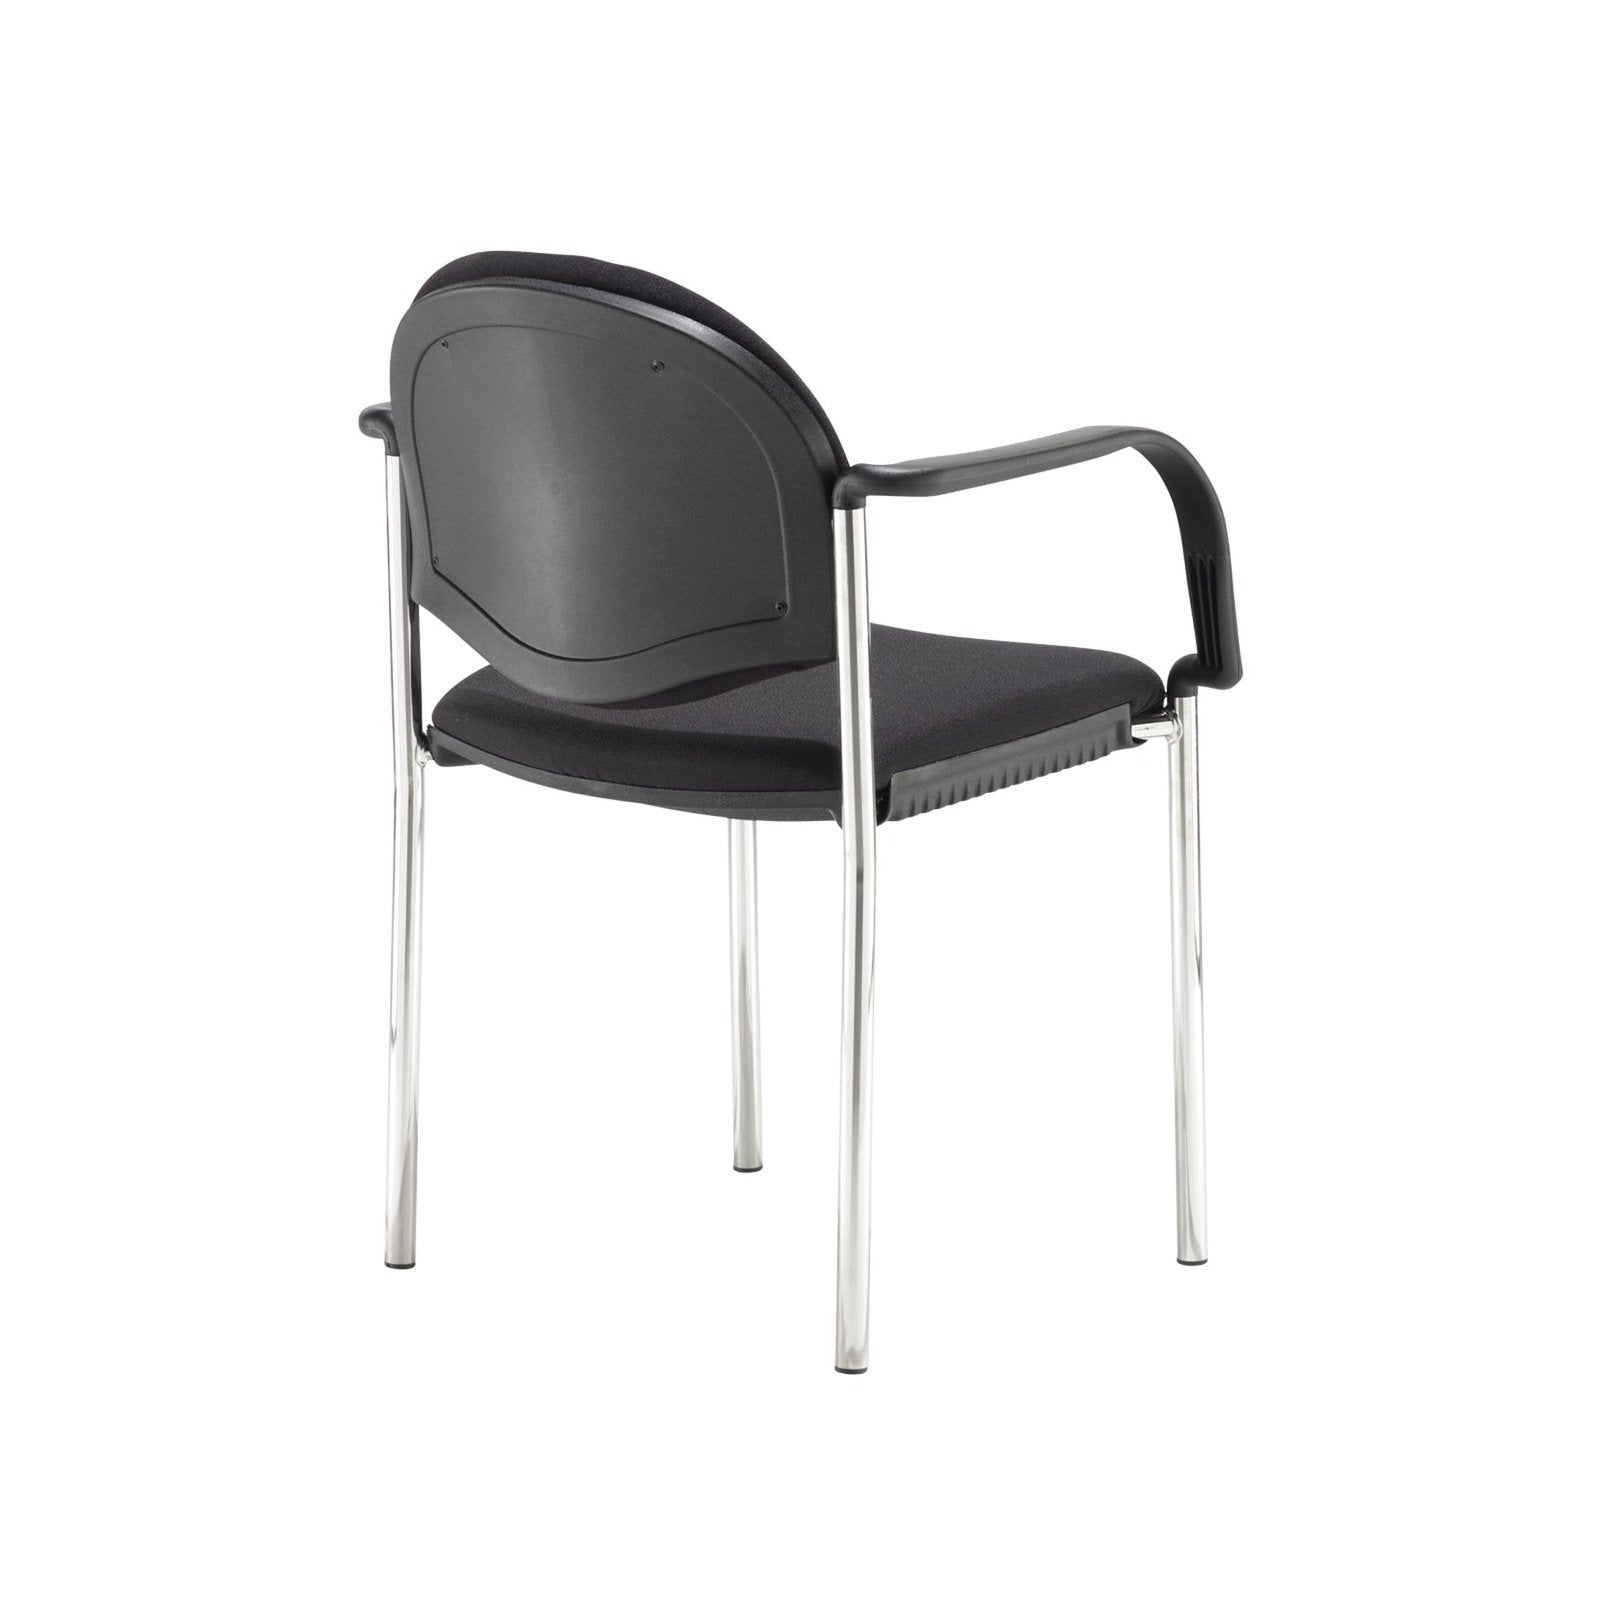 Coda multi purpose chair - Office Products Online